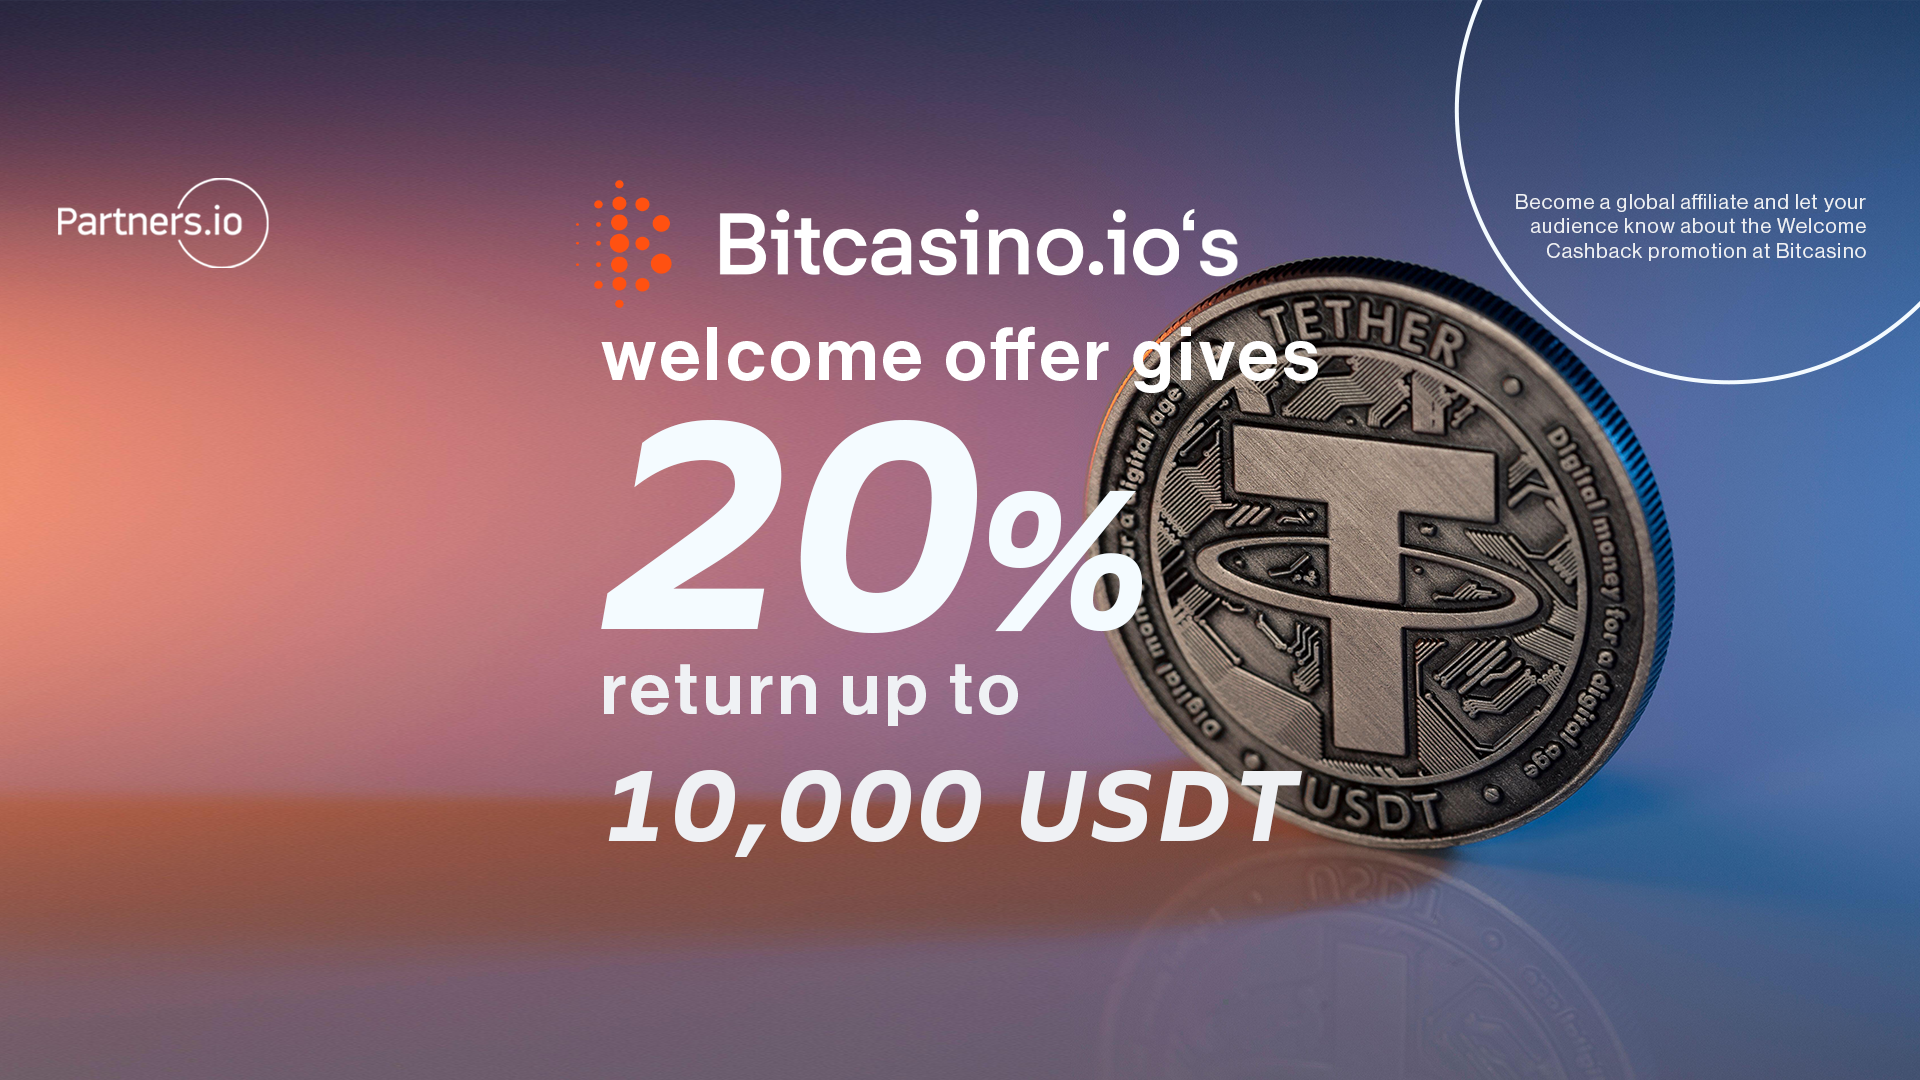 Bitcasino’s Welcome Offer gives 20% return up to 10,000 USDT